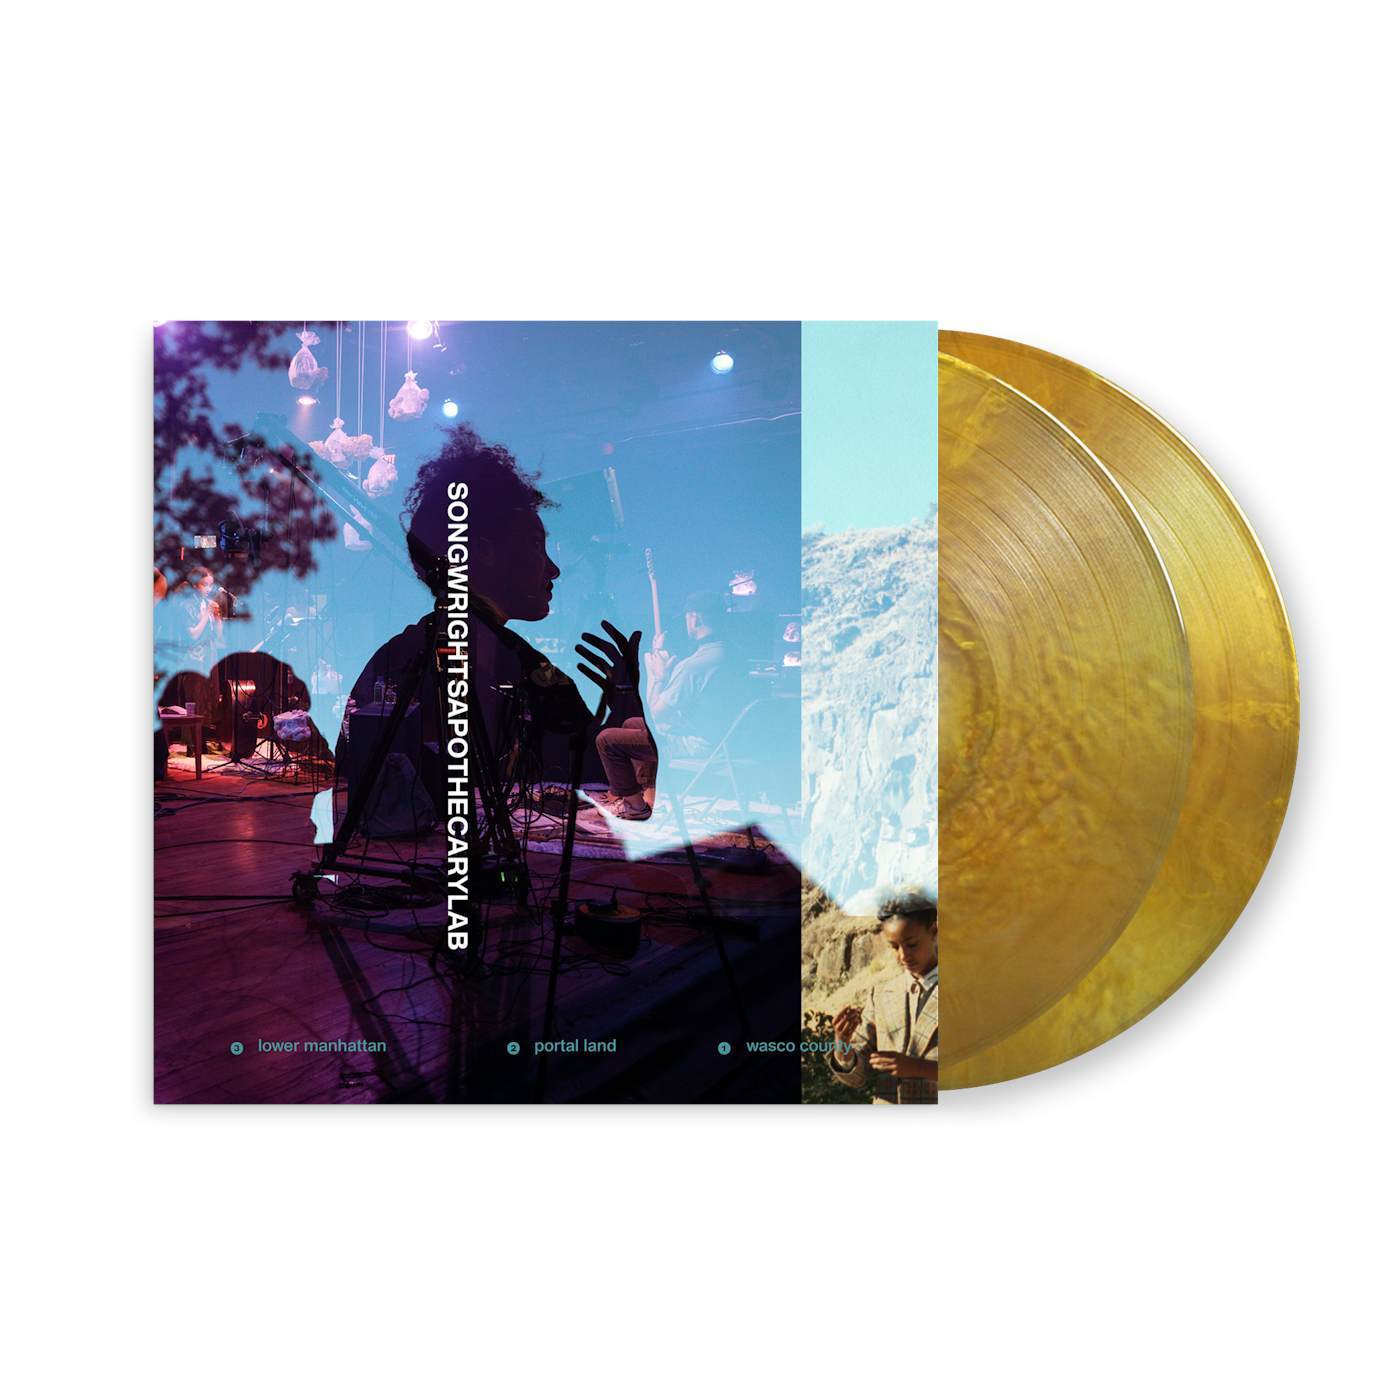 Esperanza Spalding SONGWRIGHTS APOTHECARY LAB LIMITED EDITION GOLD METALLIC 2XLP w/ SIGNED 11x11 COLLECTORS ALBUM ART PRINT